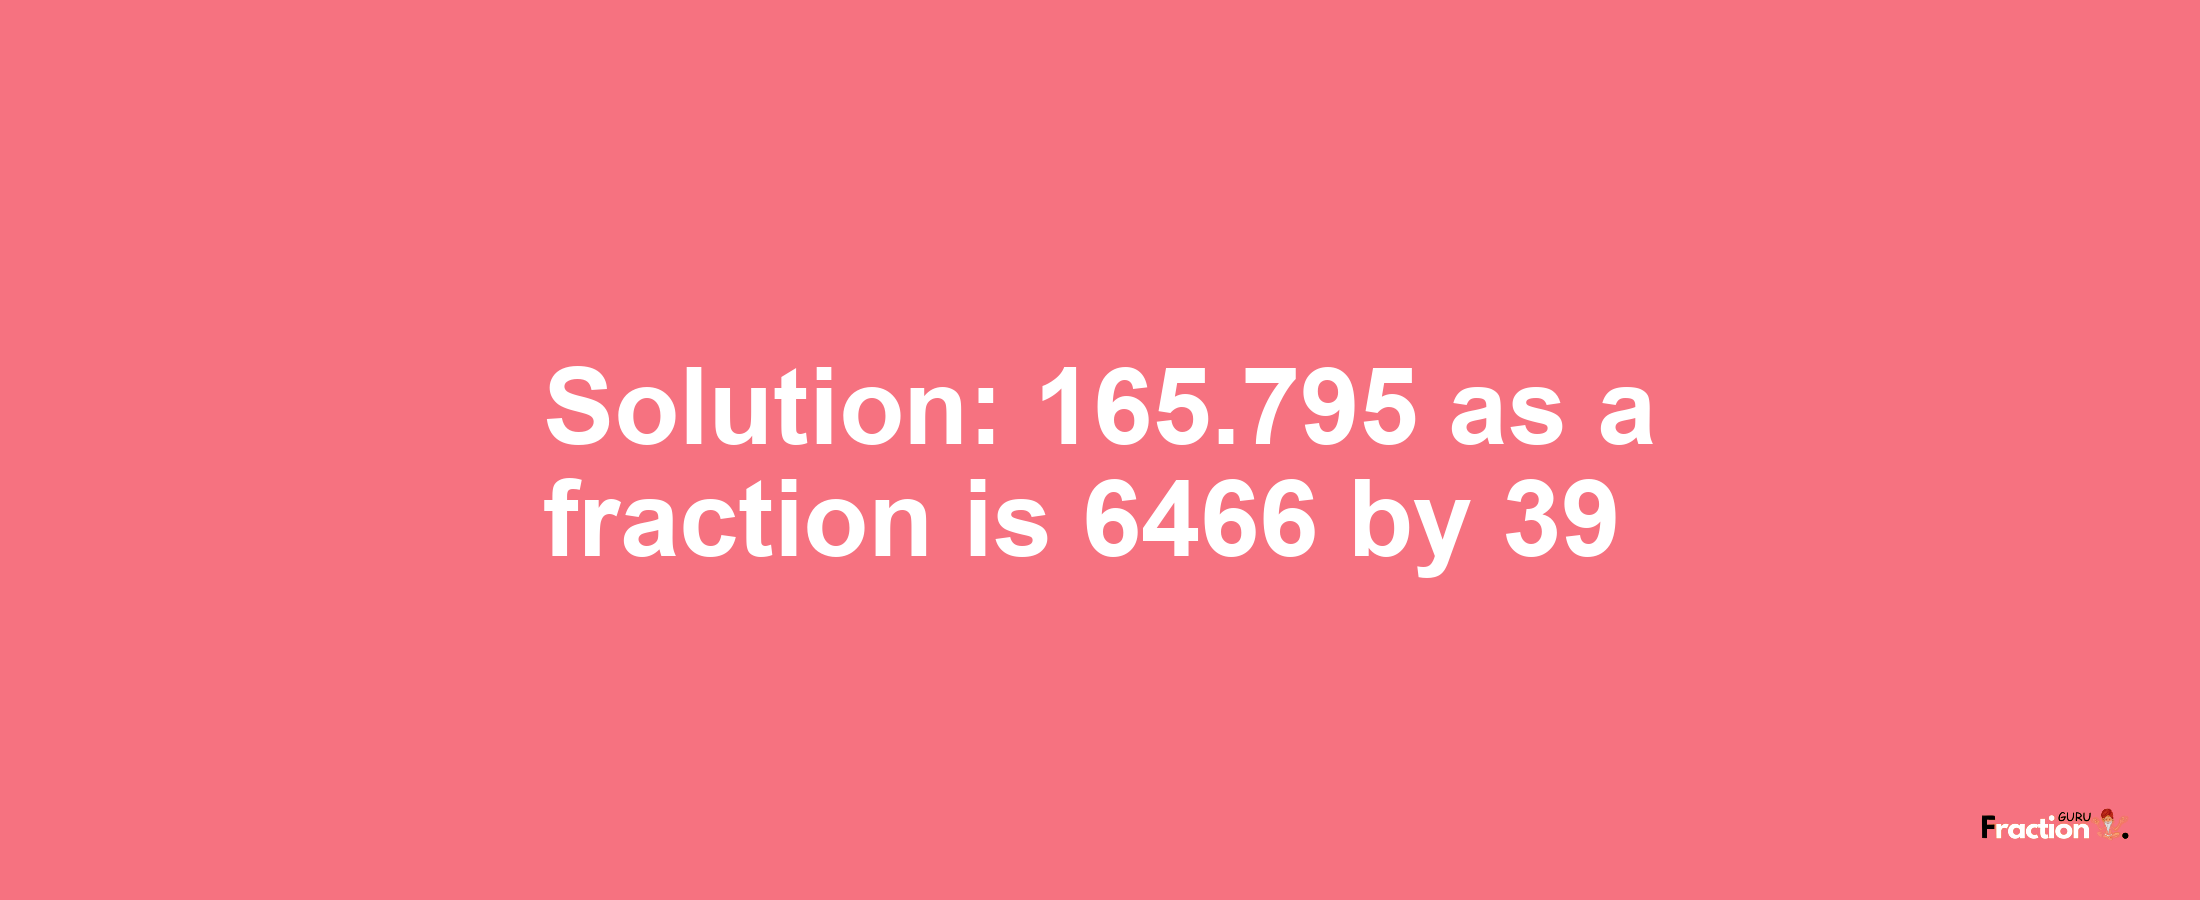 Solution:165.795 as a fraction is 6466/39